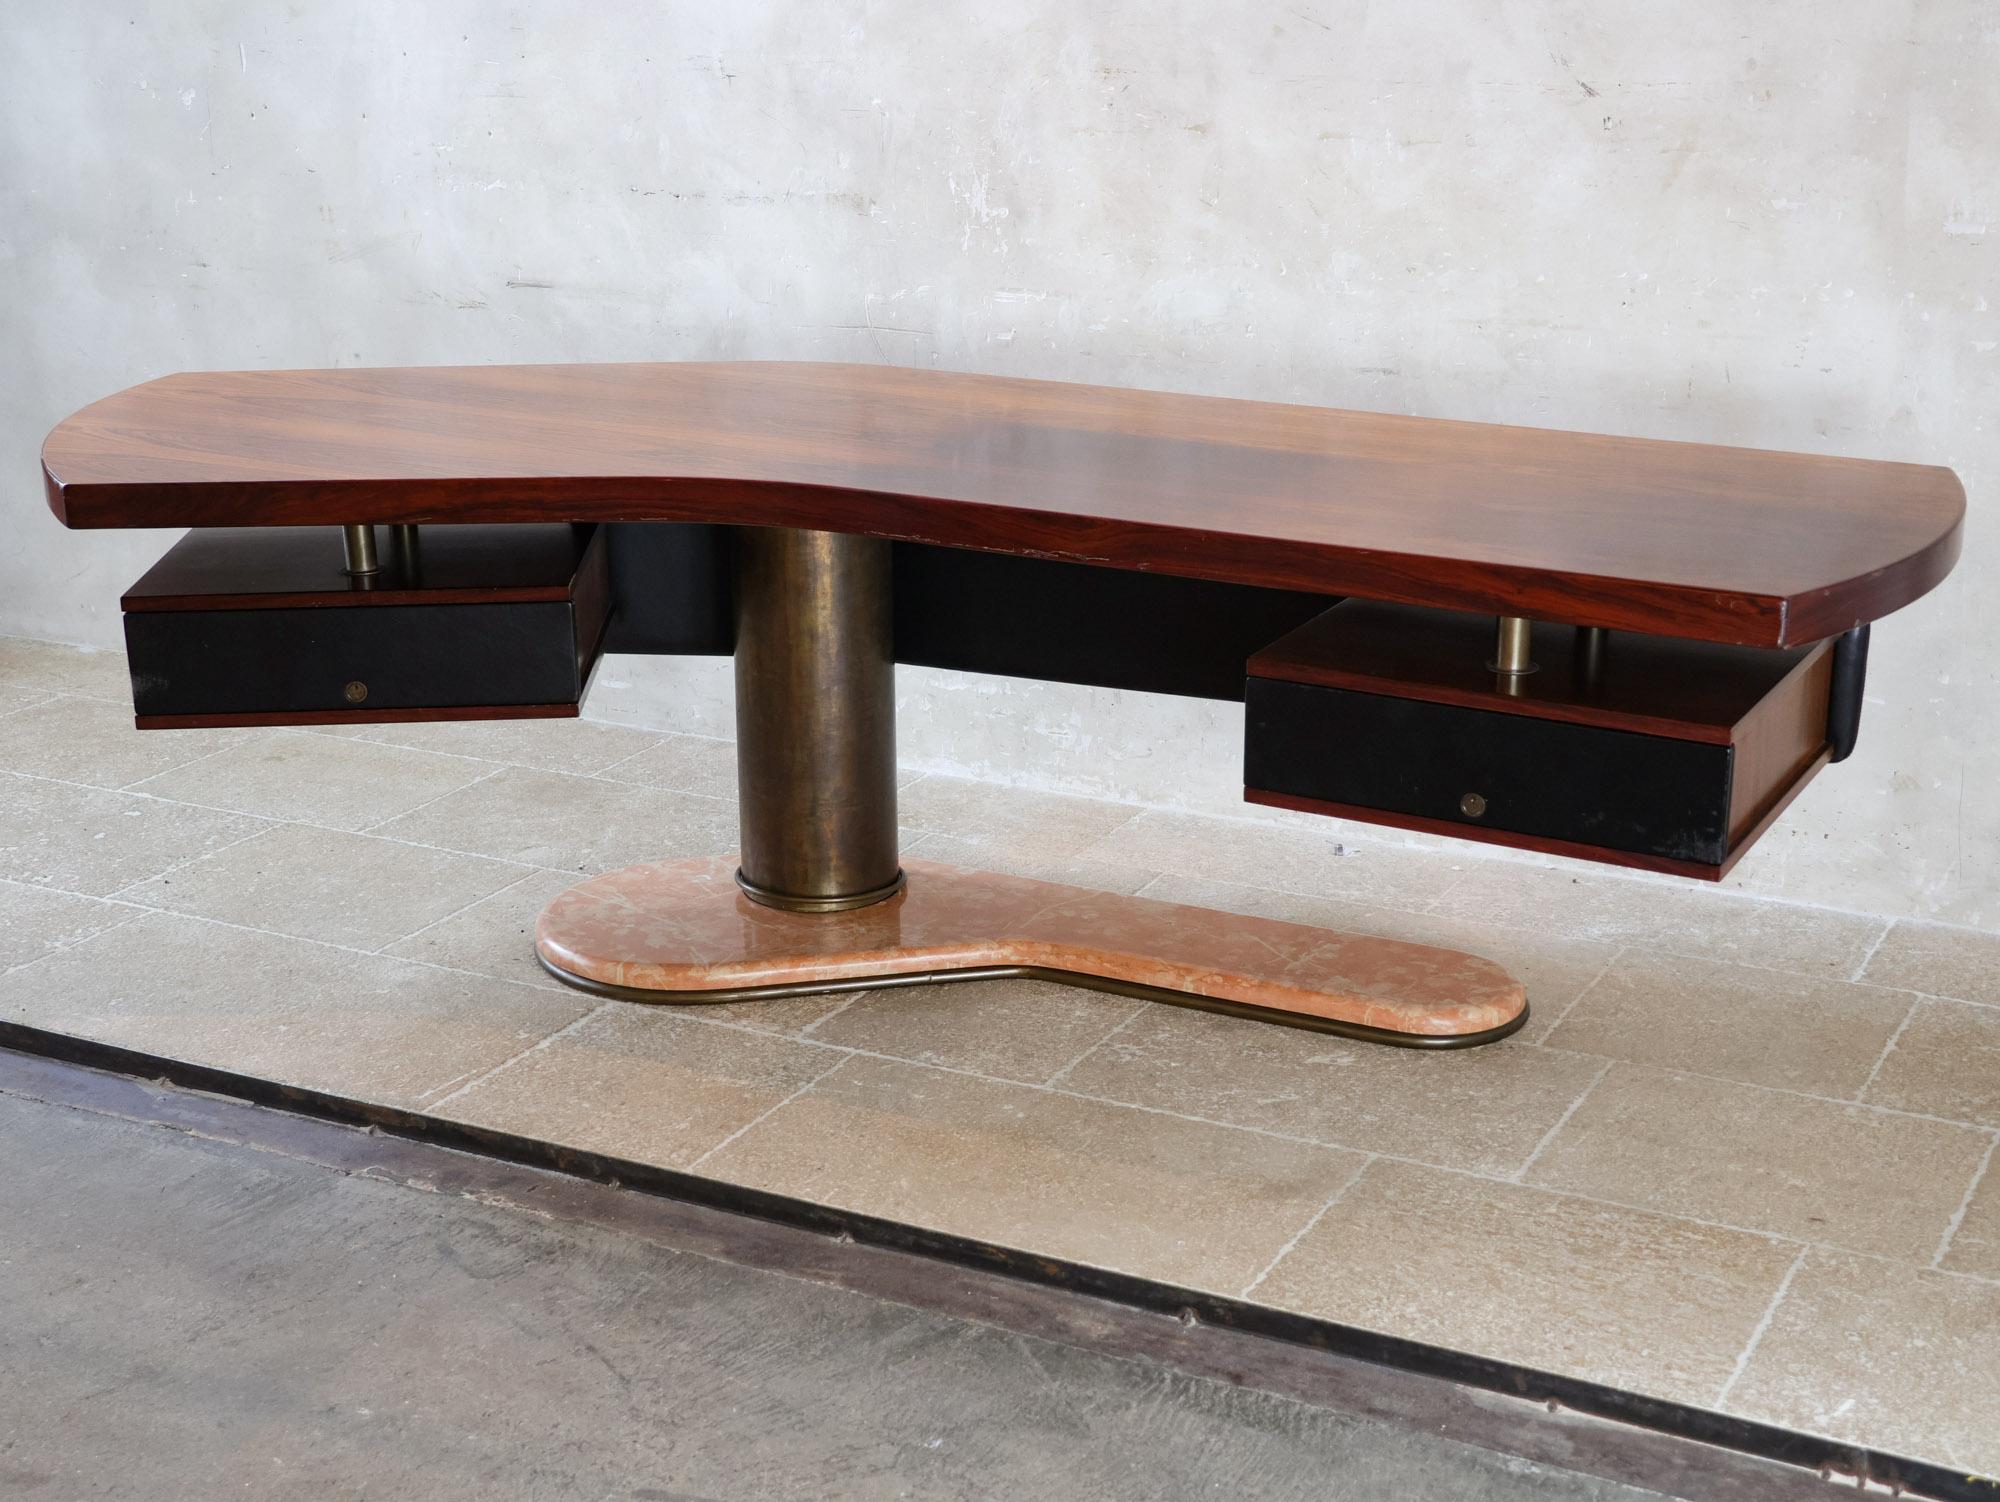 Boomerang desk by Renzo Schirolli, a striking piece from the 1960s. Renzo Schirolli's Booomerang desk symbolizes the bold elegance of Italian design from that time.

The desk has a unique boomerang-shaped top made of walnut, complemented by a panel